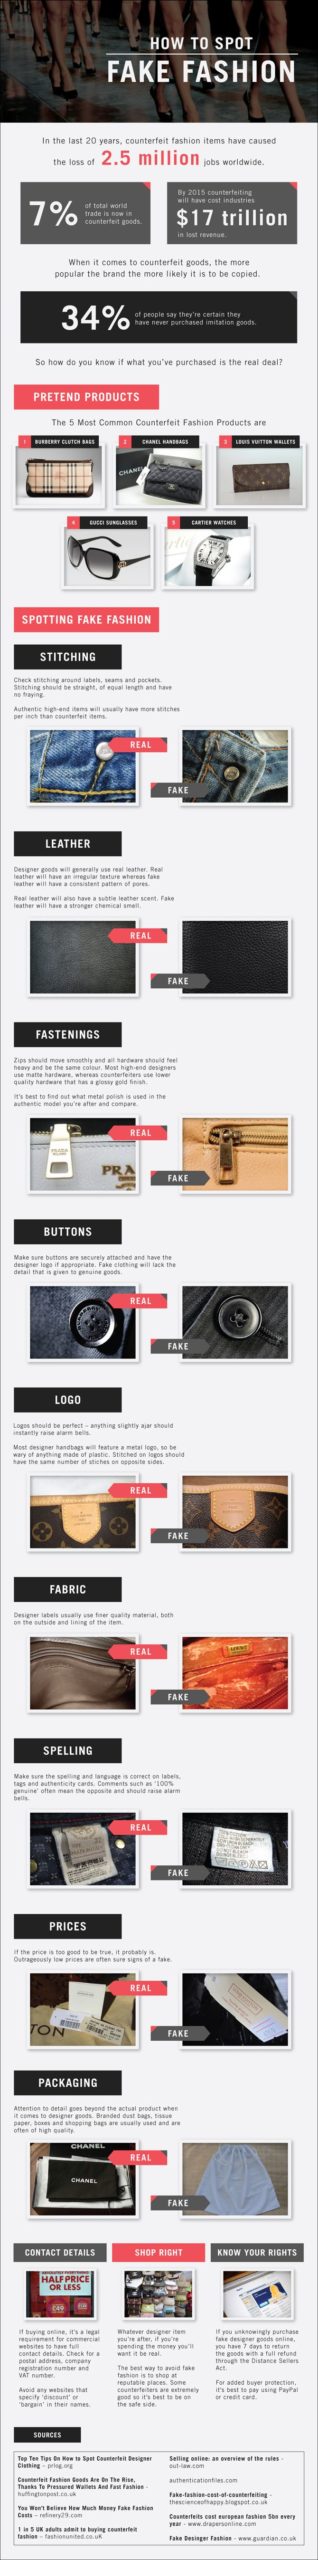 Spot Fake Fashion Items With This Infographic